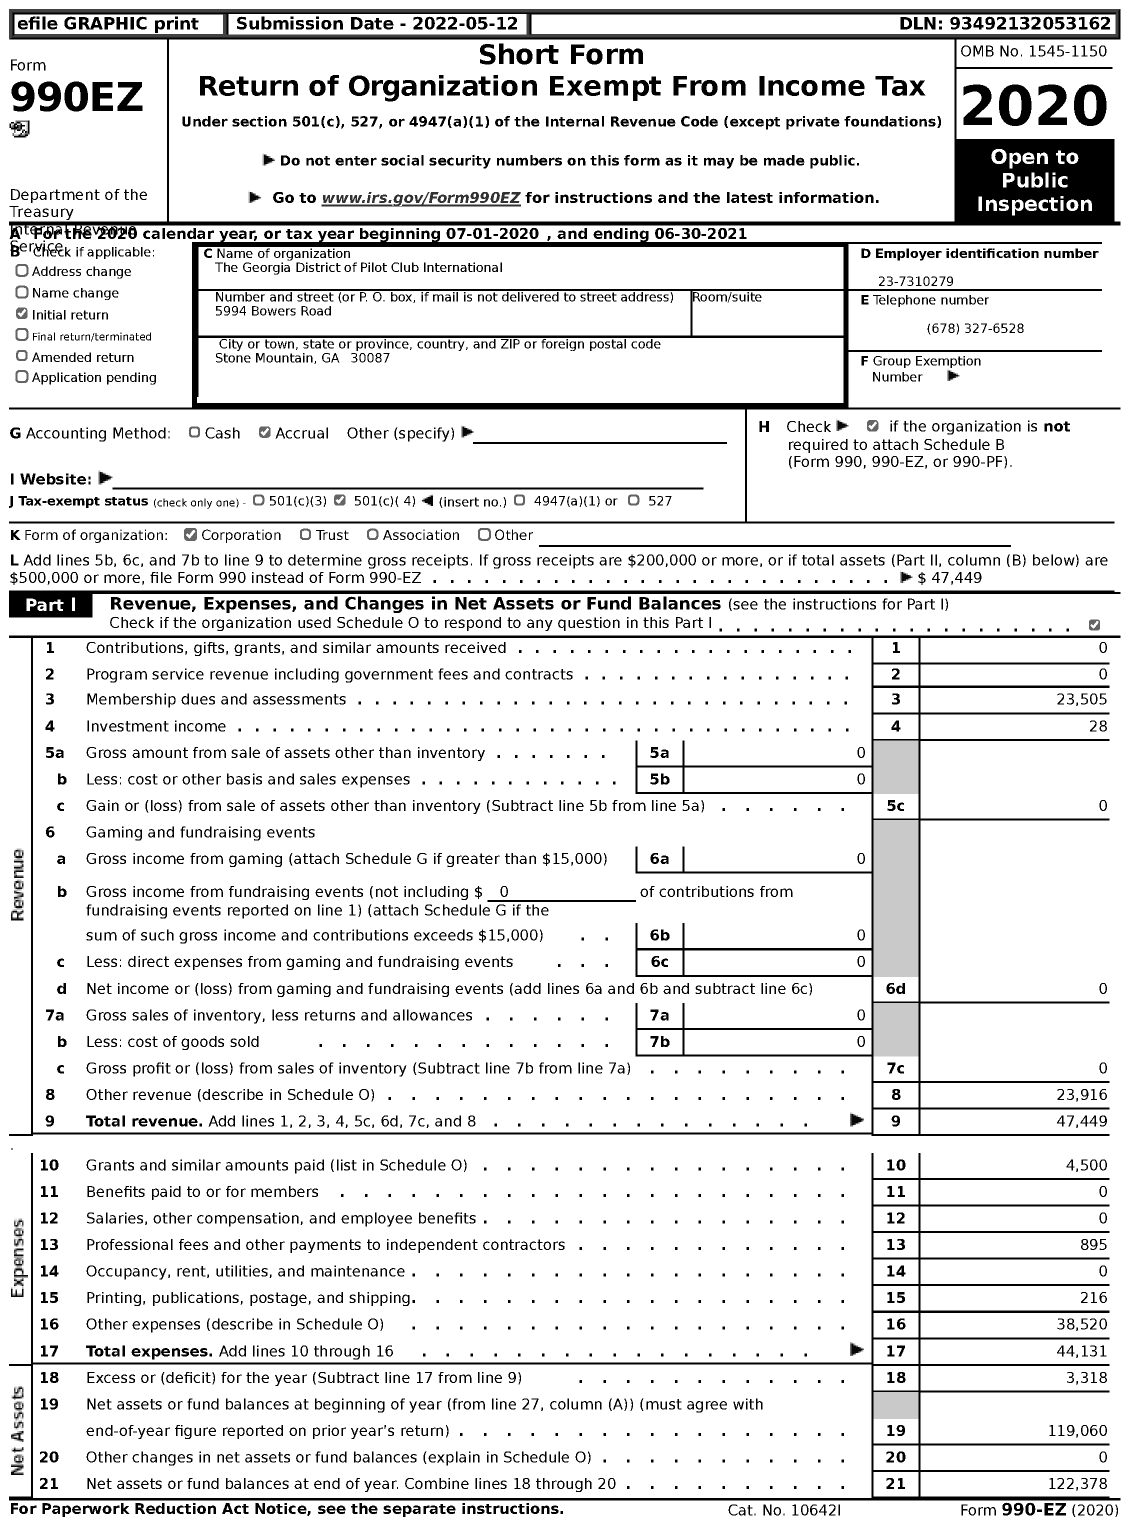 Image of first page of 2020 Form 990EZ for The Georgia District of Pilot Club International